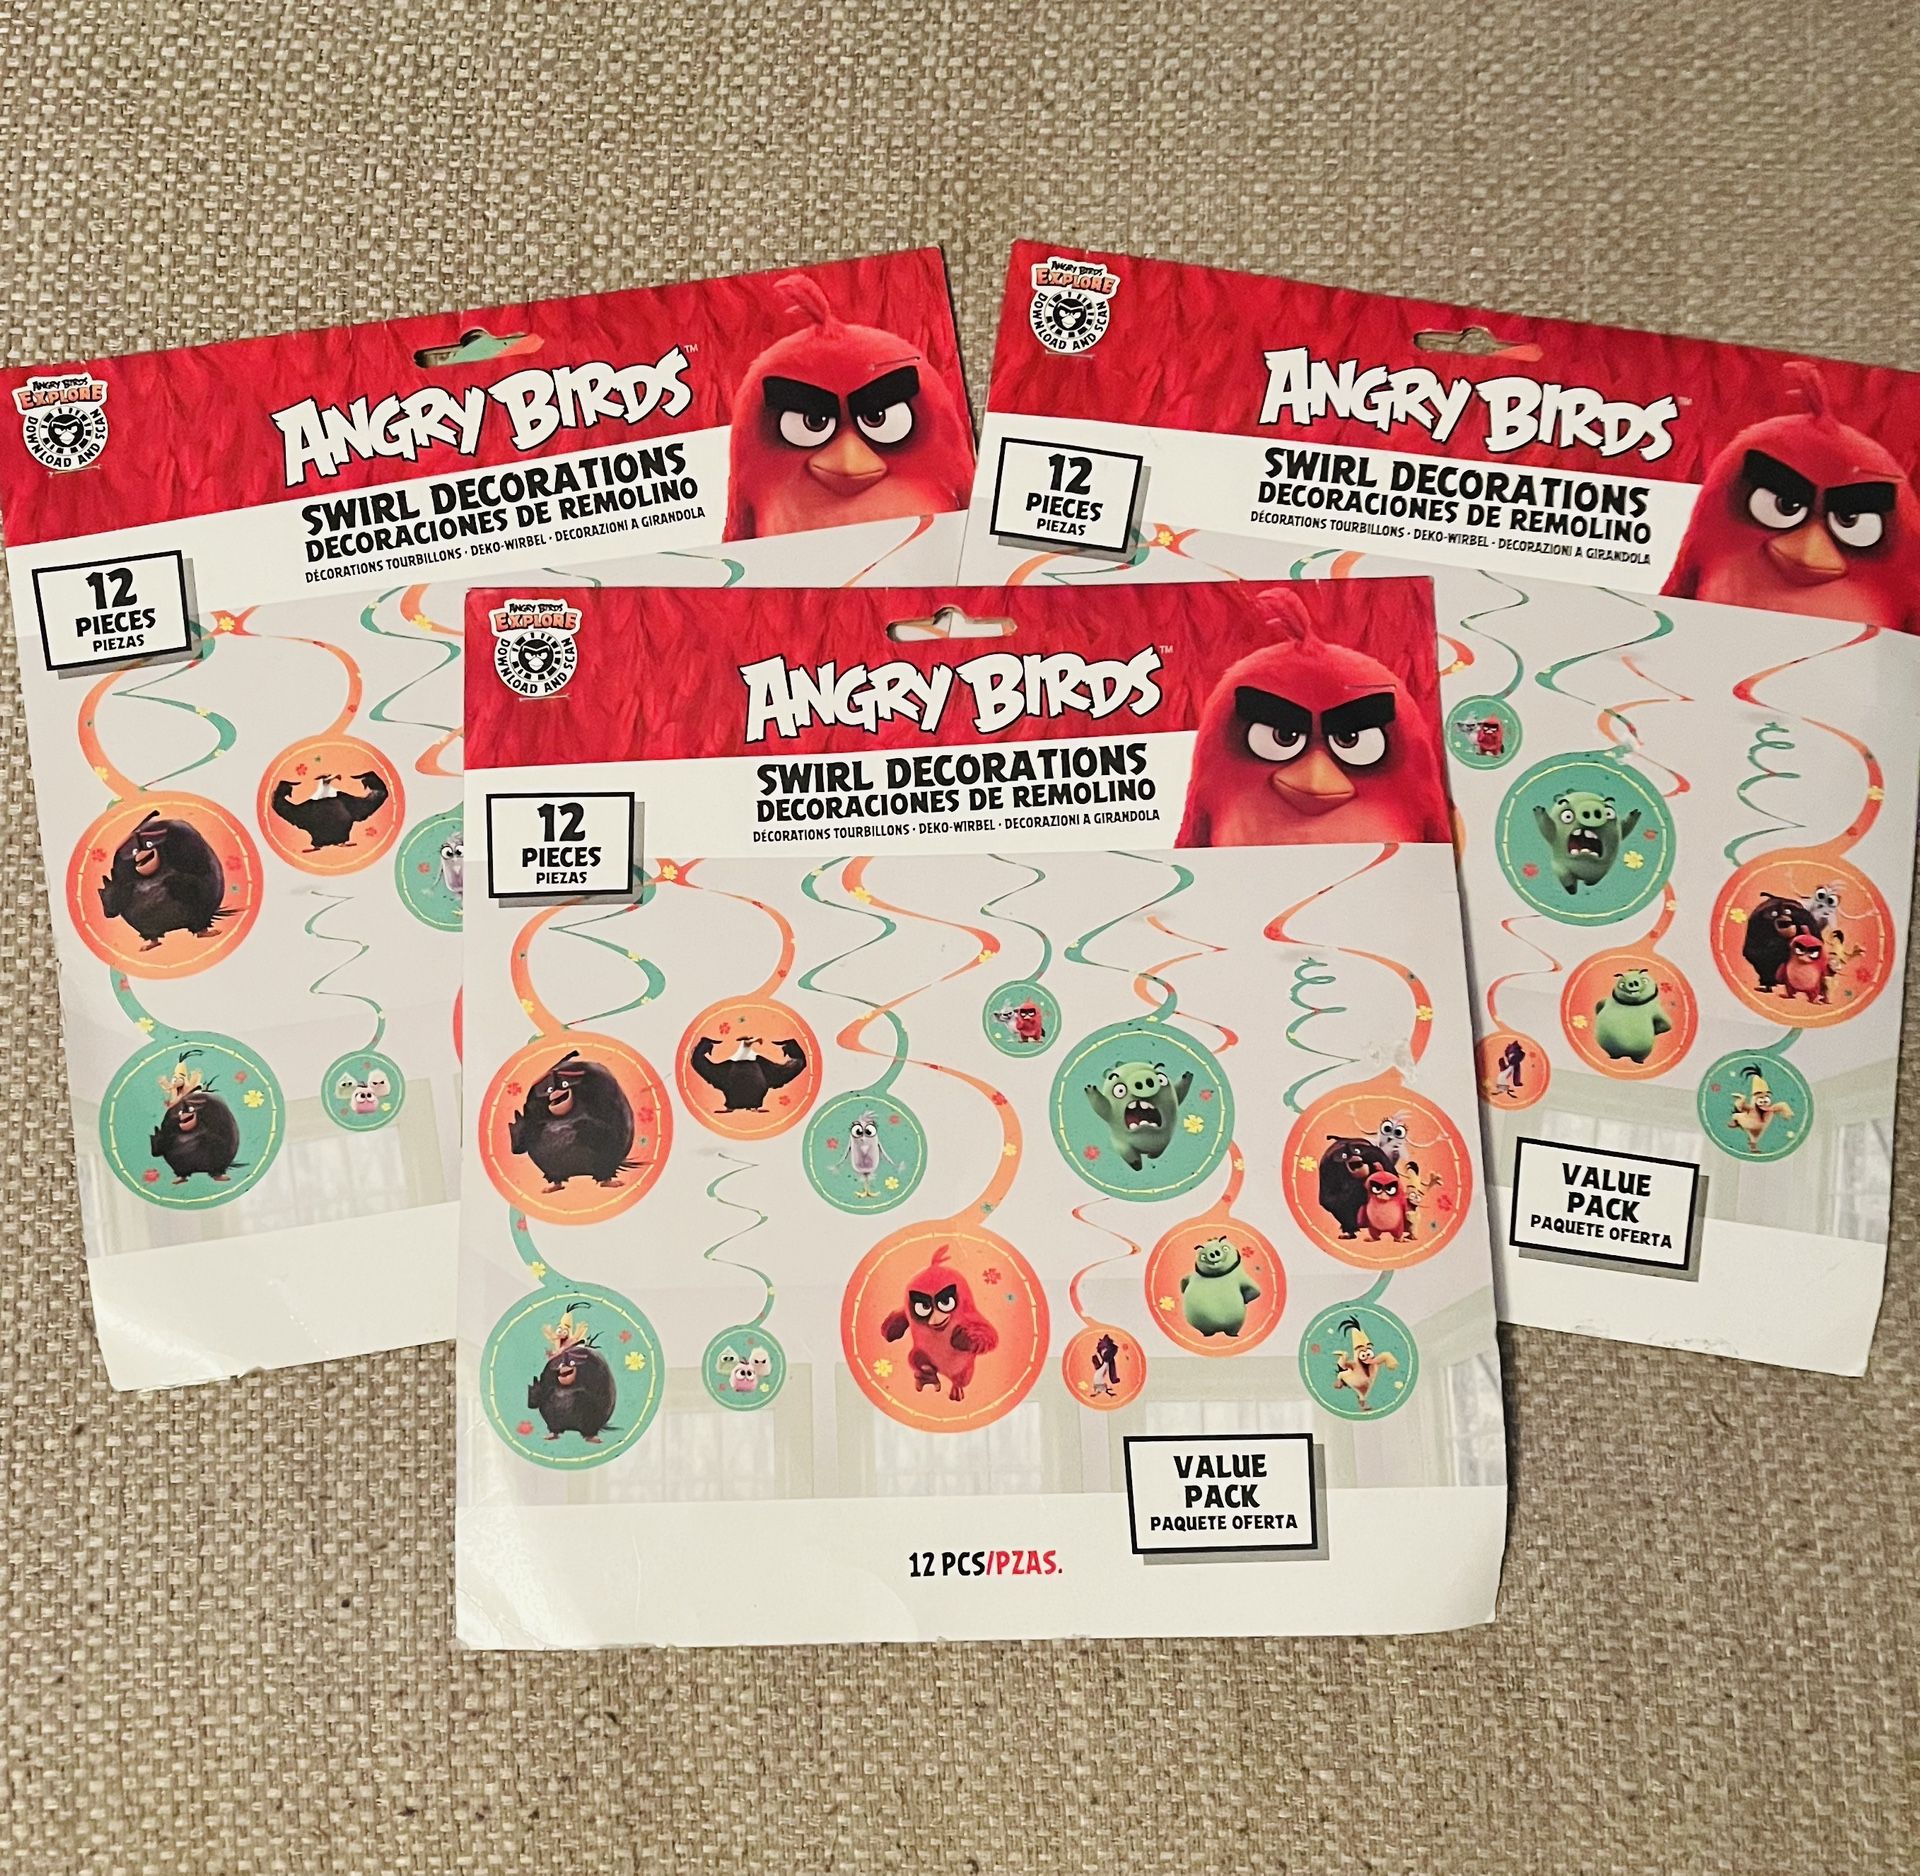 3 Packs Hard to Find Angry Bird Swirl Decorations